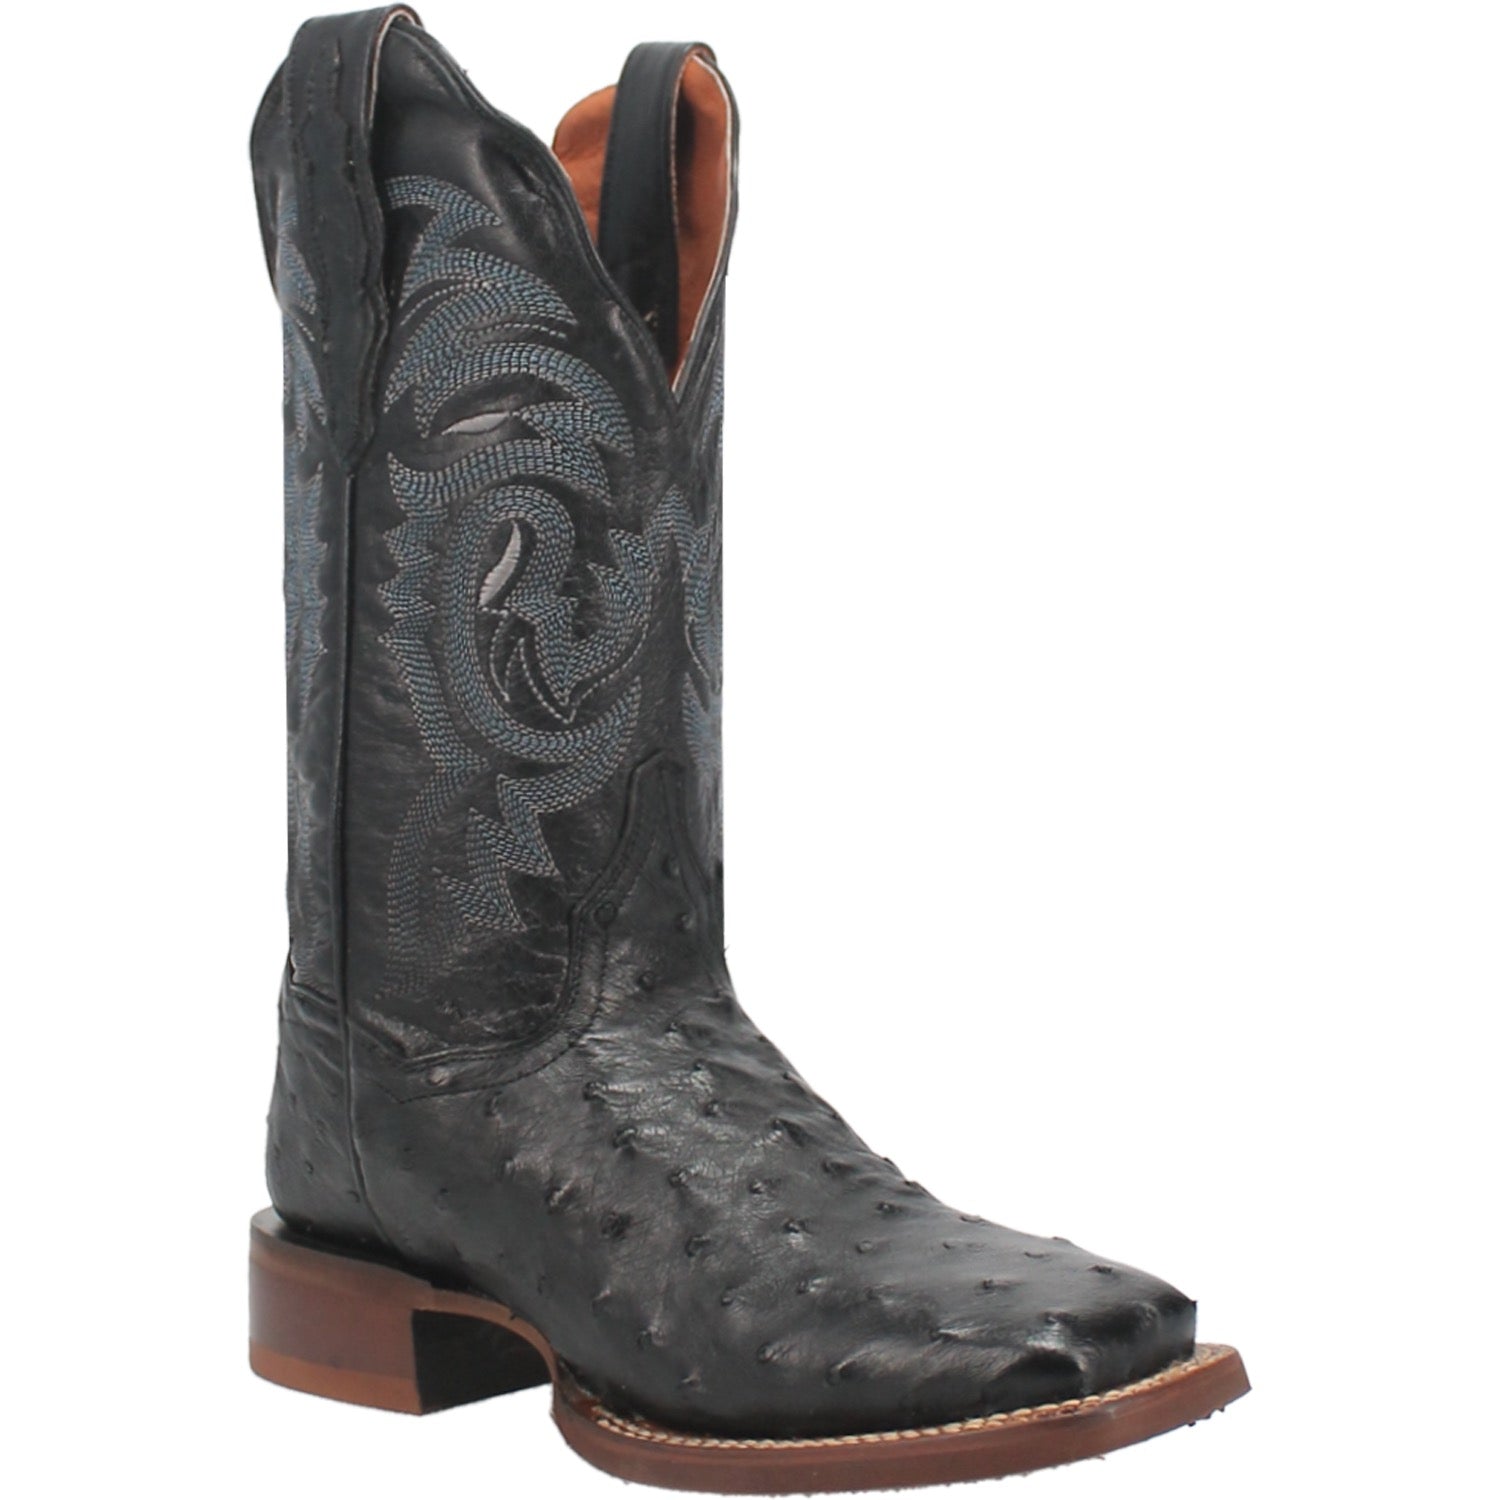 KYLO FULL QUILL OSTRICH BOOT